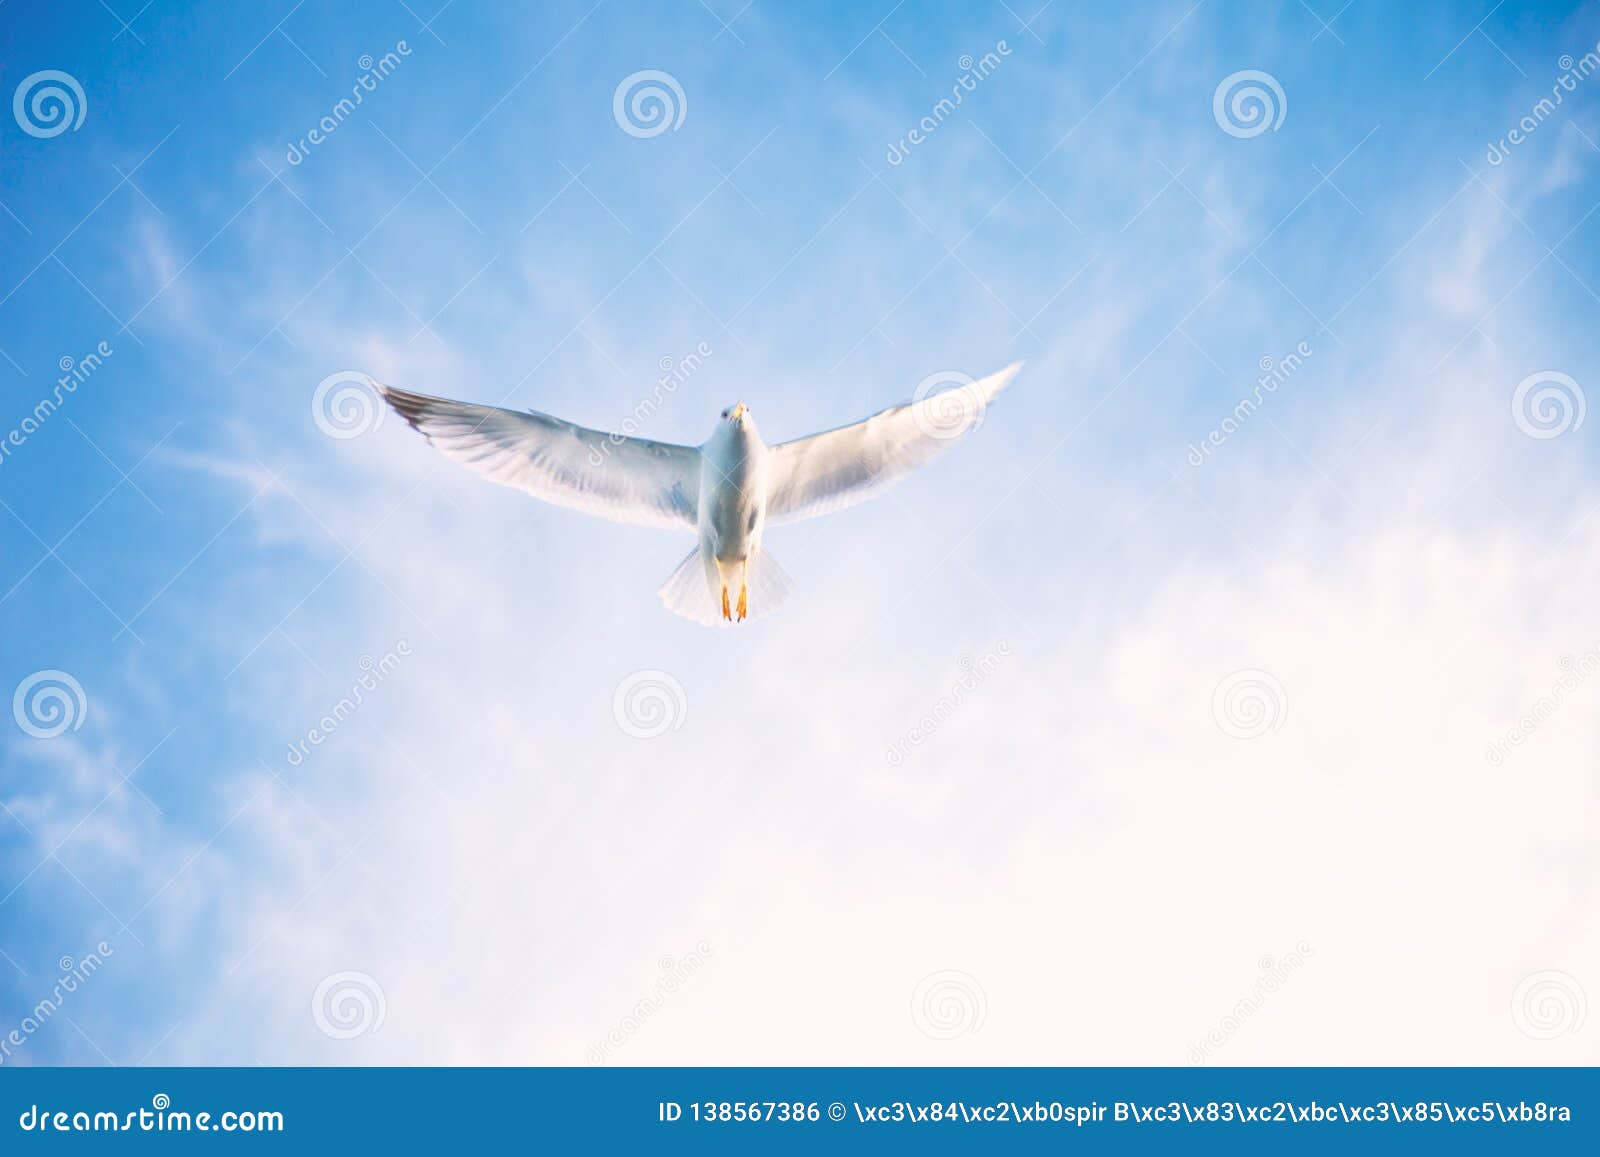 62 546 Flying Birds Sky Photos Free Royalty Free Stock Photos From Dreamstime